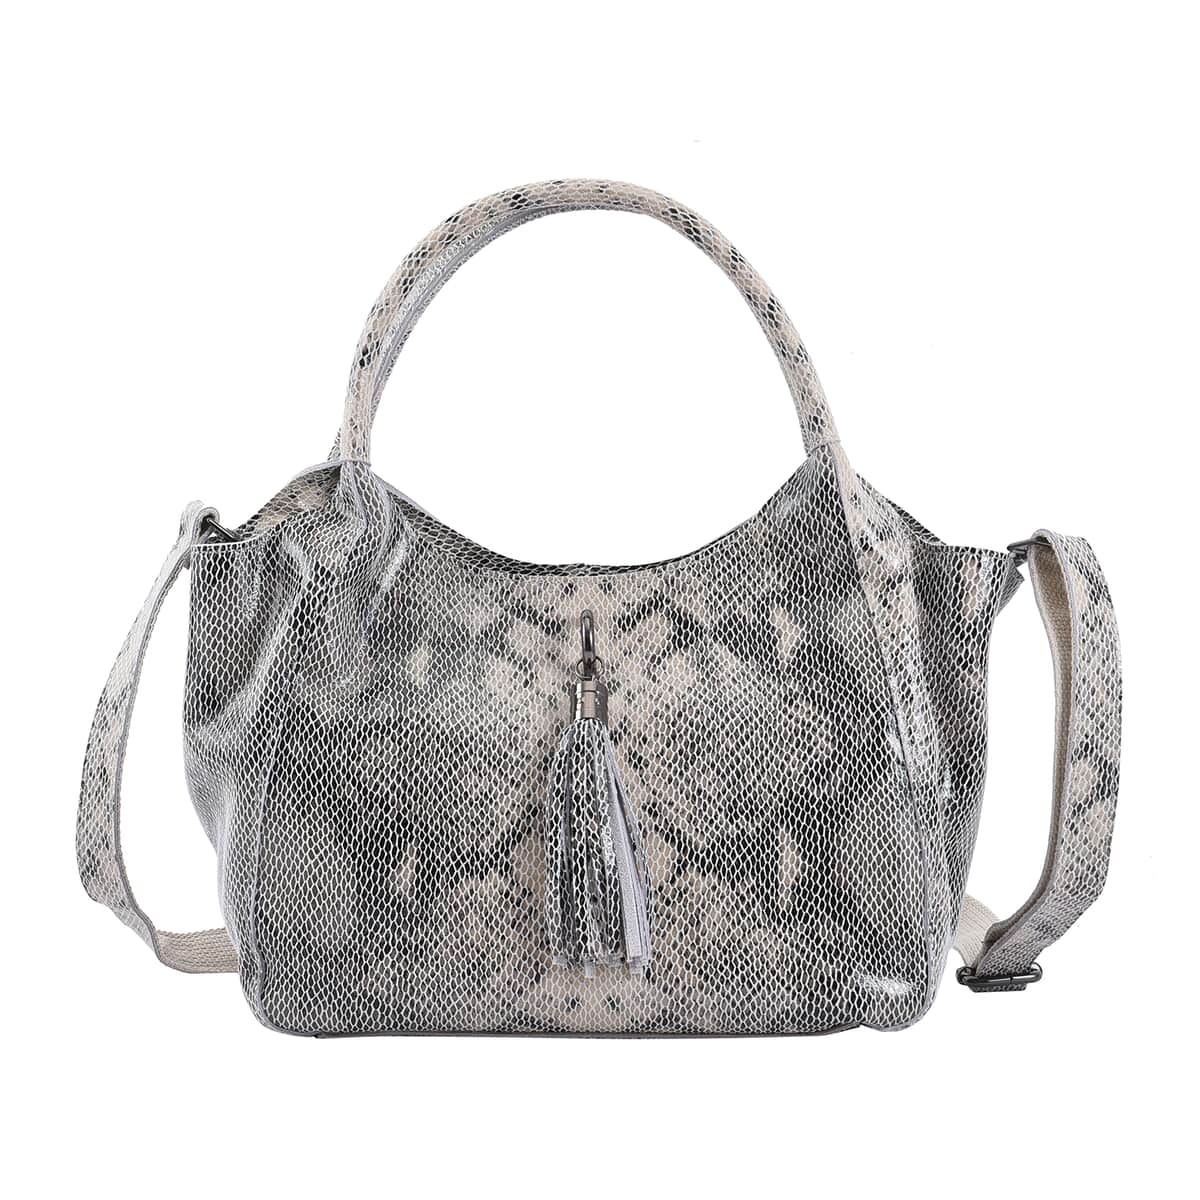 Gray Snake Print Genuine Leather Hobo Bag with Detachable Shoulder Strap and Handle Drop image number 0